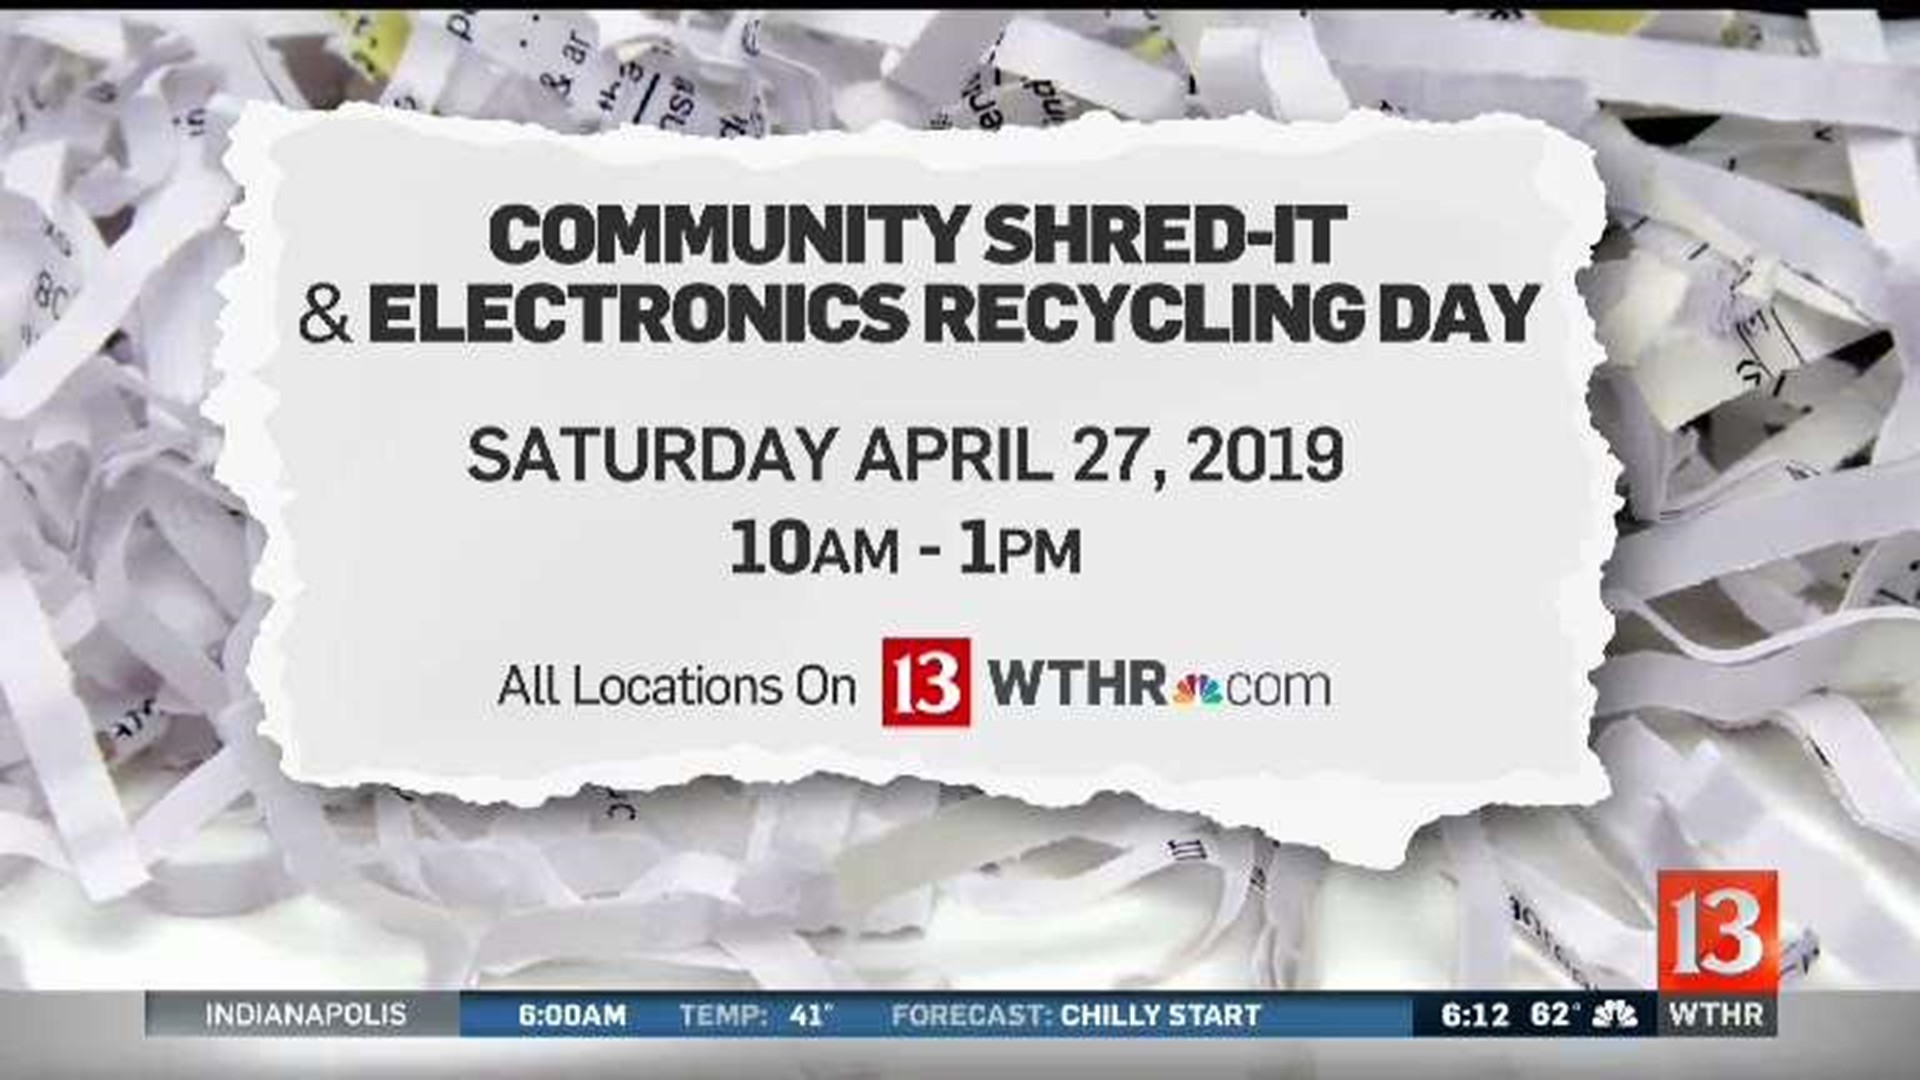 Community ShredIT day hosted at various locations on April 27